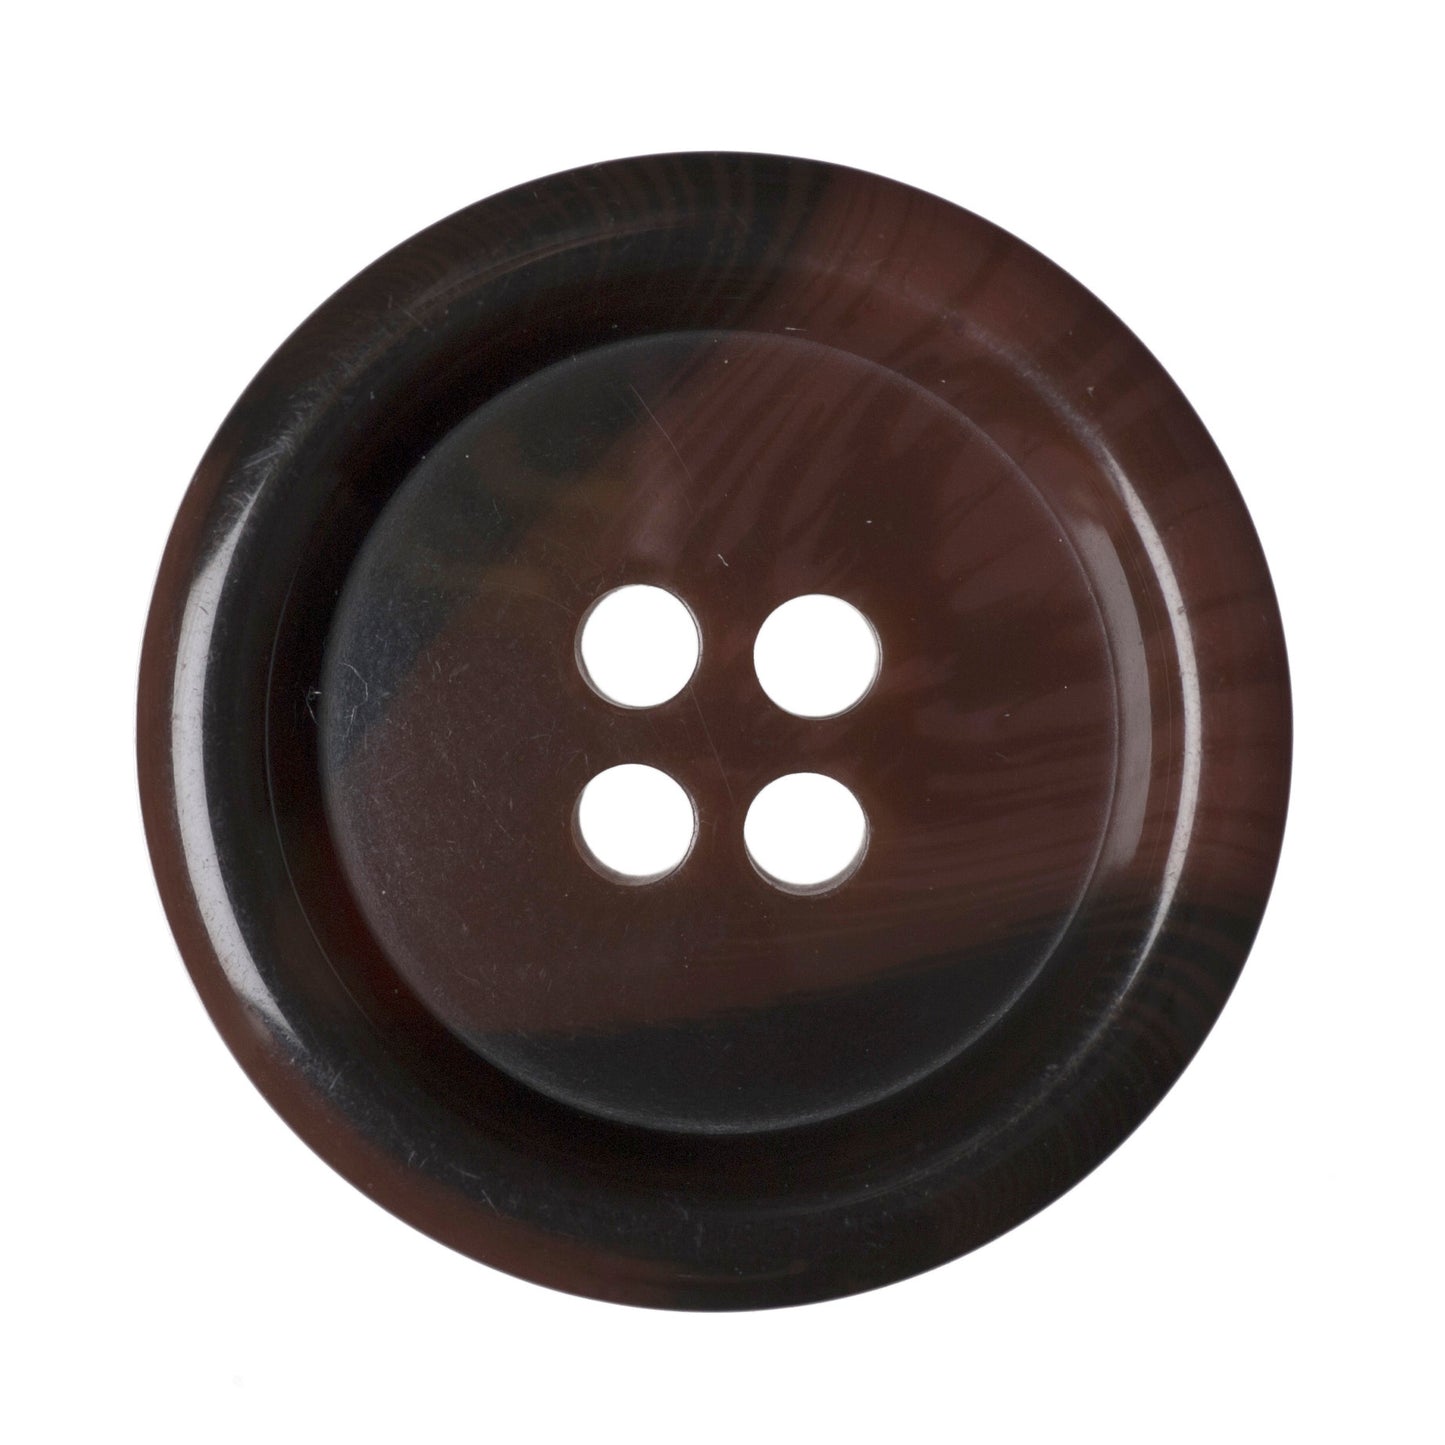 4 Hole Variegated Jacket Button - 25mm - Tan [LB15.6]